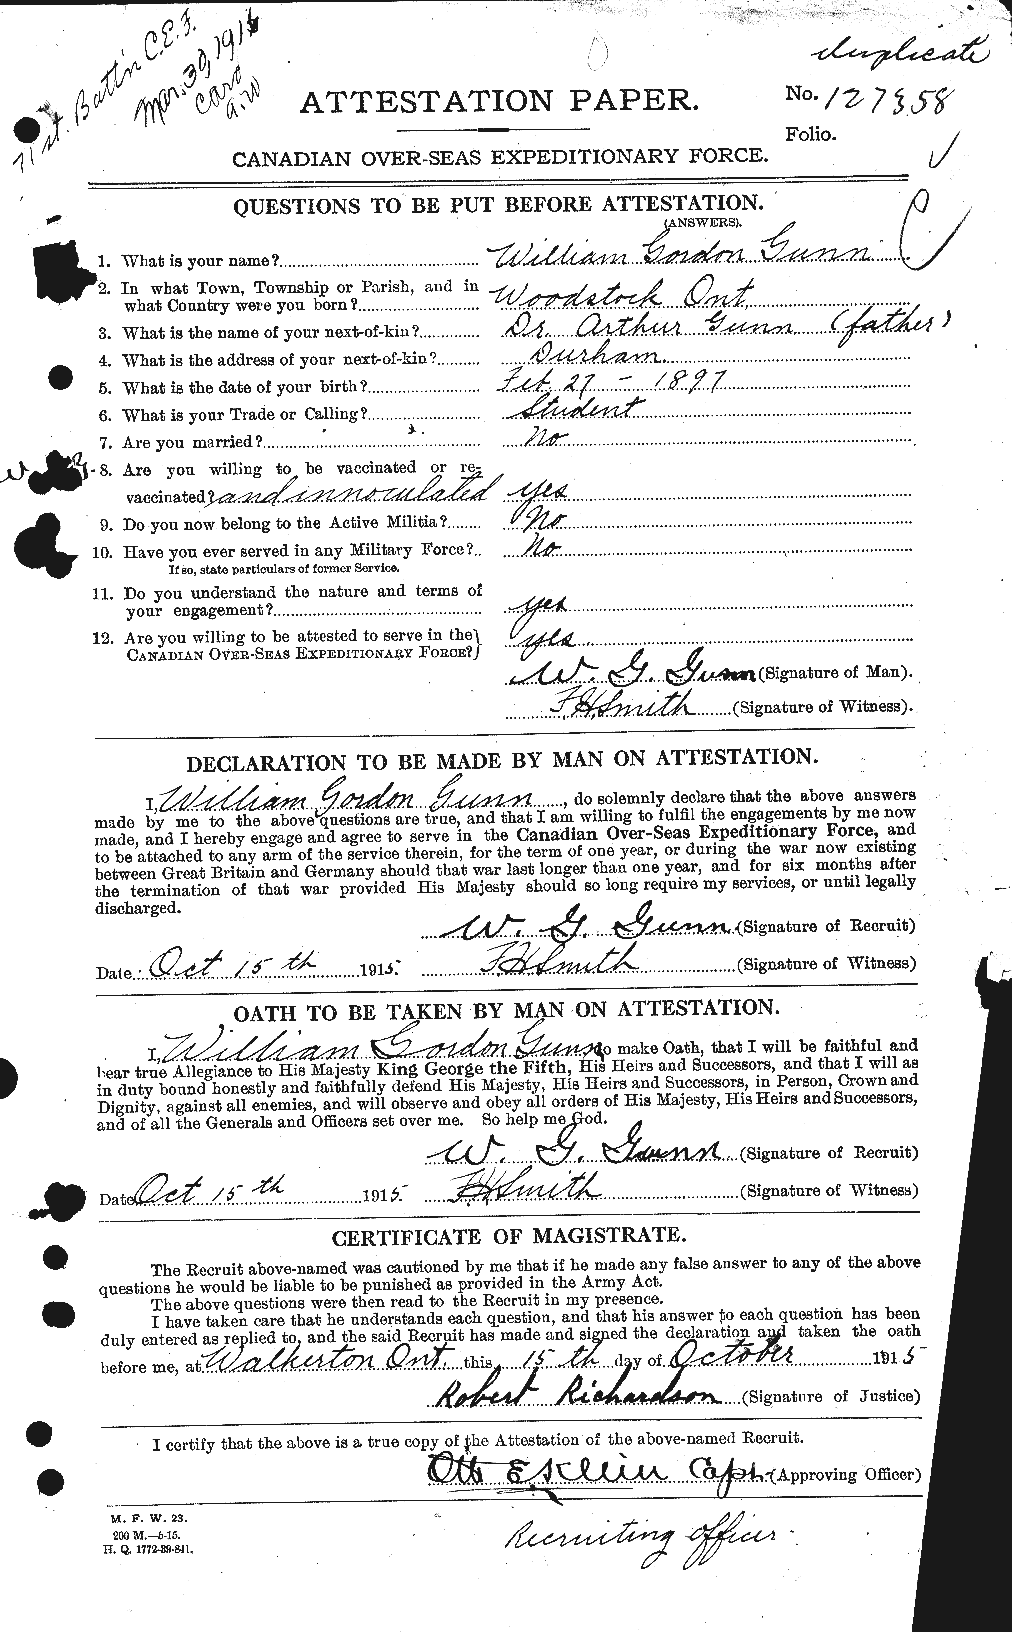 Personnel Records of the First World War - CEF 369367a